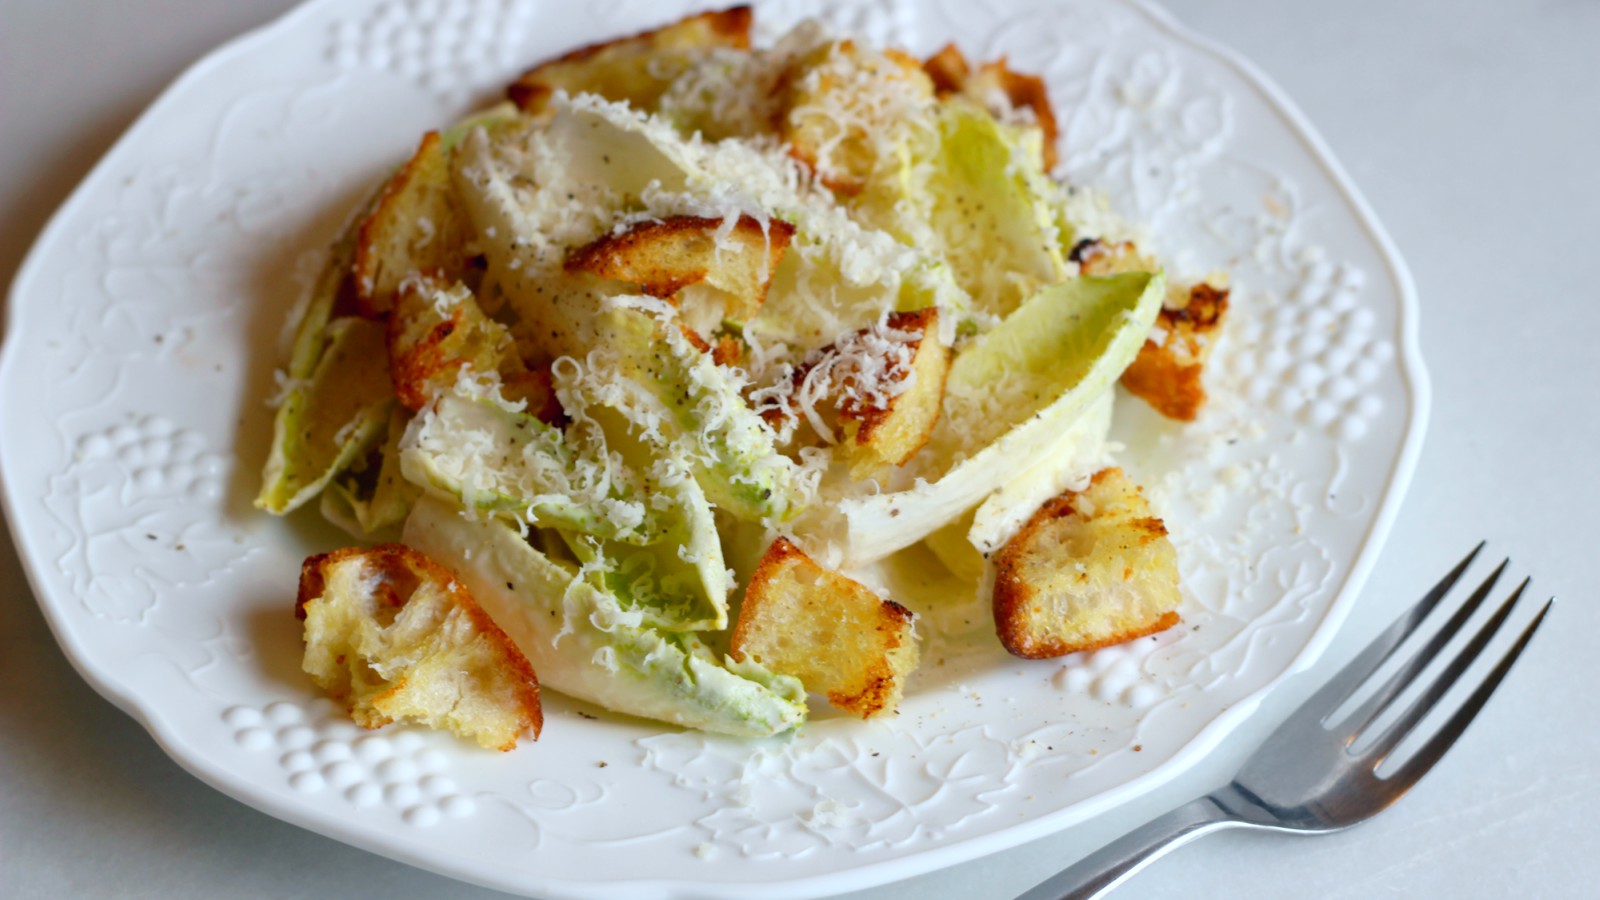 How To Make Great Caesar Salads If You’re Still A Little Scared Of Romaine